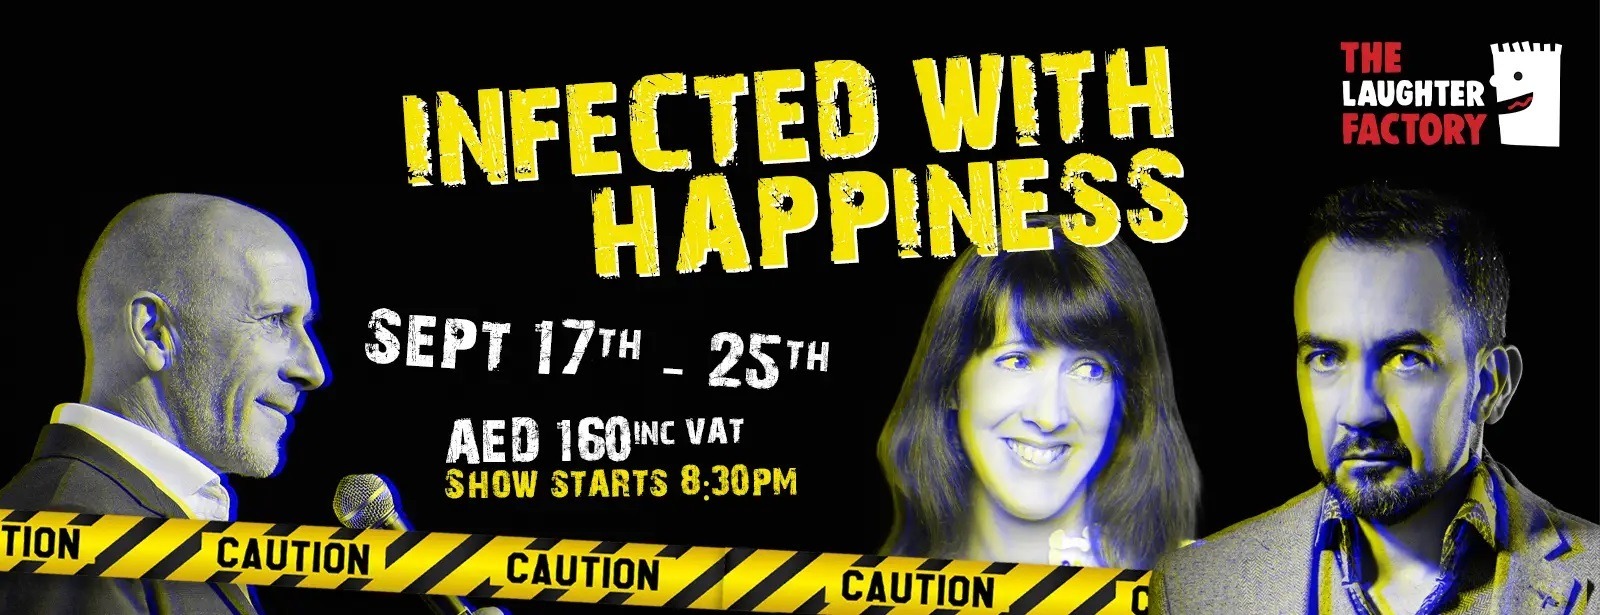 The Laughter Factory: “Infected with Happiness” - Coming Soon in UAE